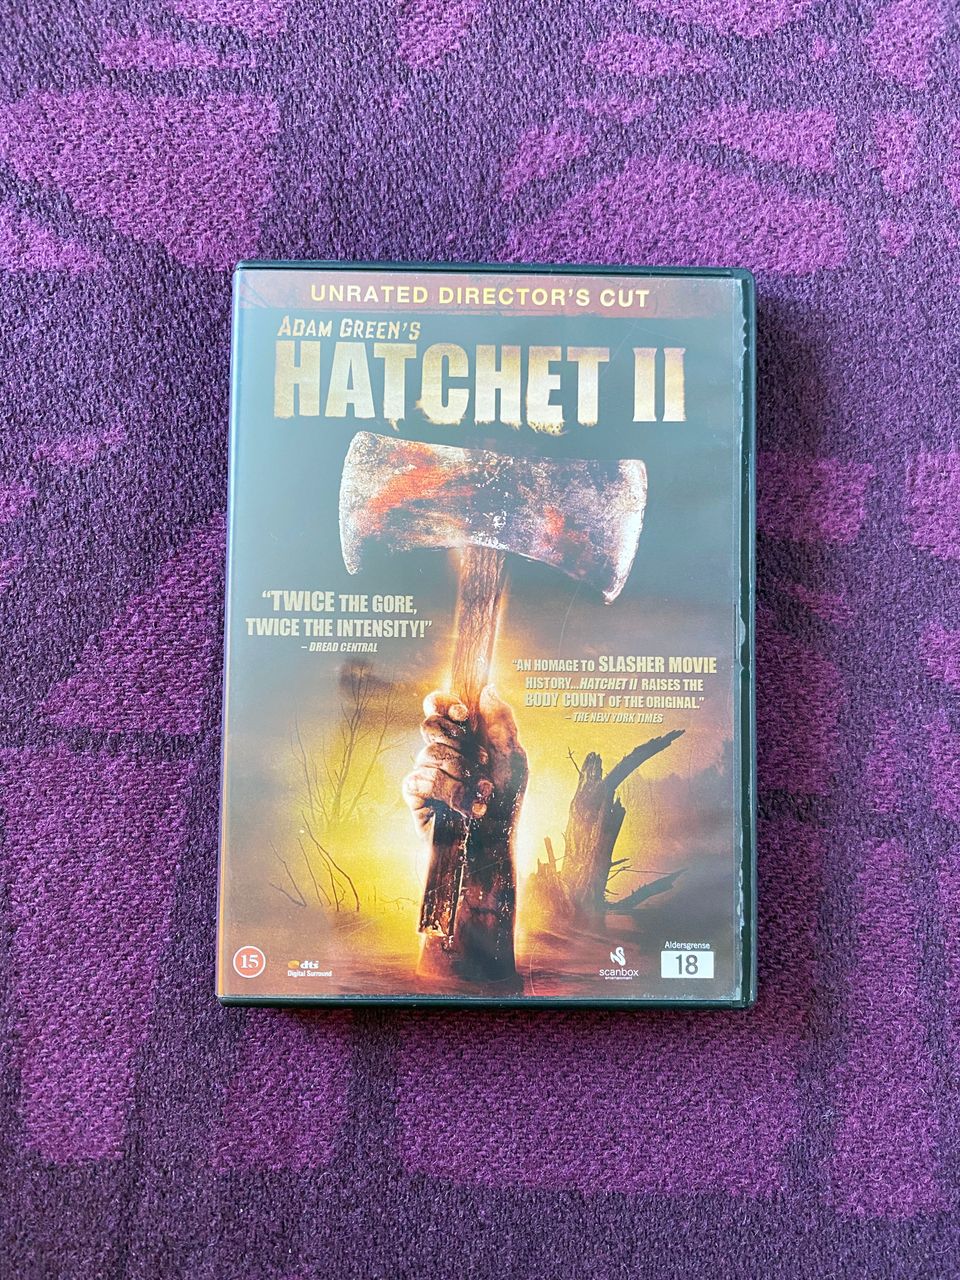 Hatchet 2 DVD Unrated Director's Cut